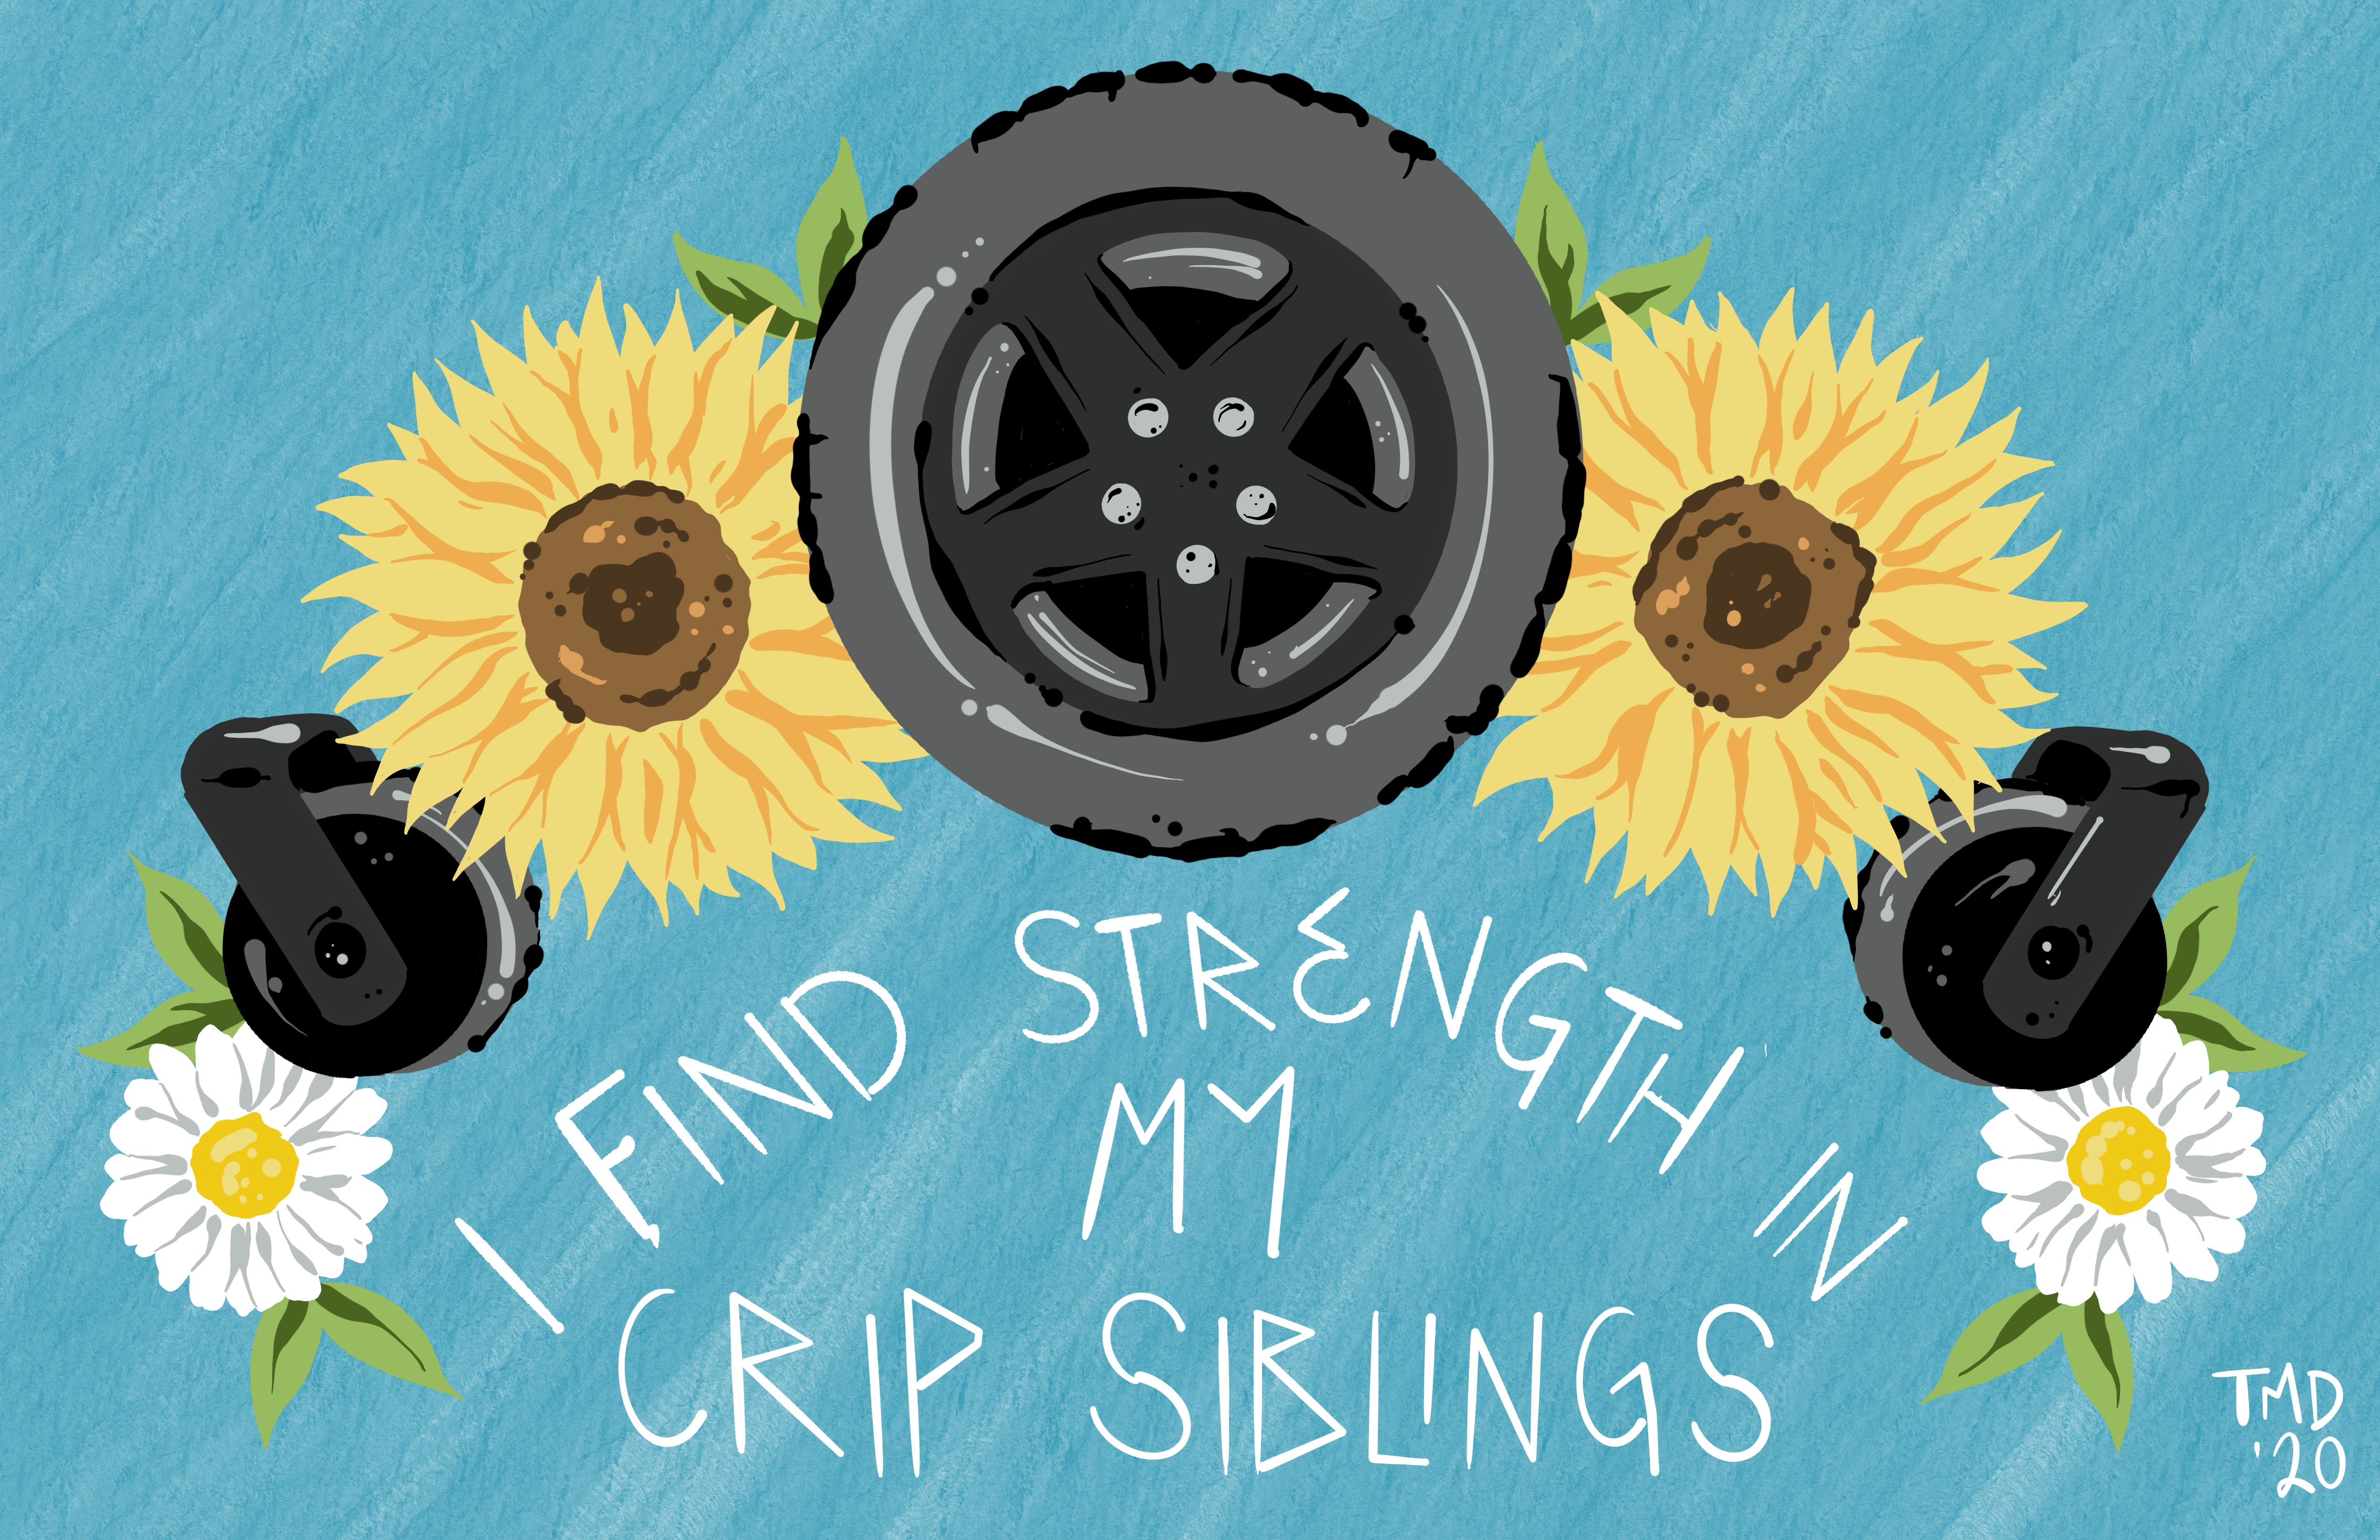 A digital drawing of an arc of yellow and white flowers, interspersed with wheels from a wheelchair. Beneath this arc are the words "I find strength in my crip siblings," written in white. The background is a light blue. 